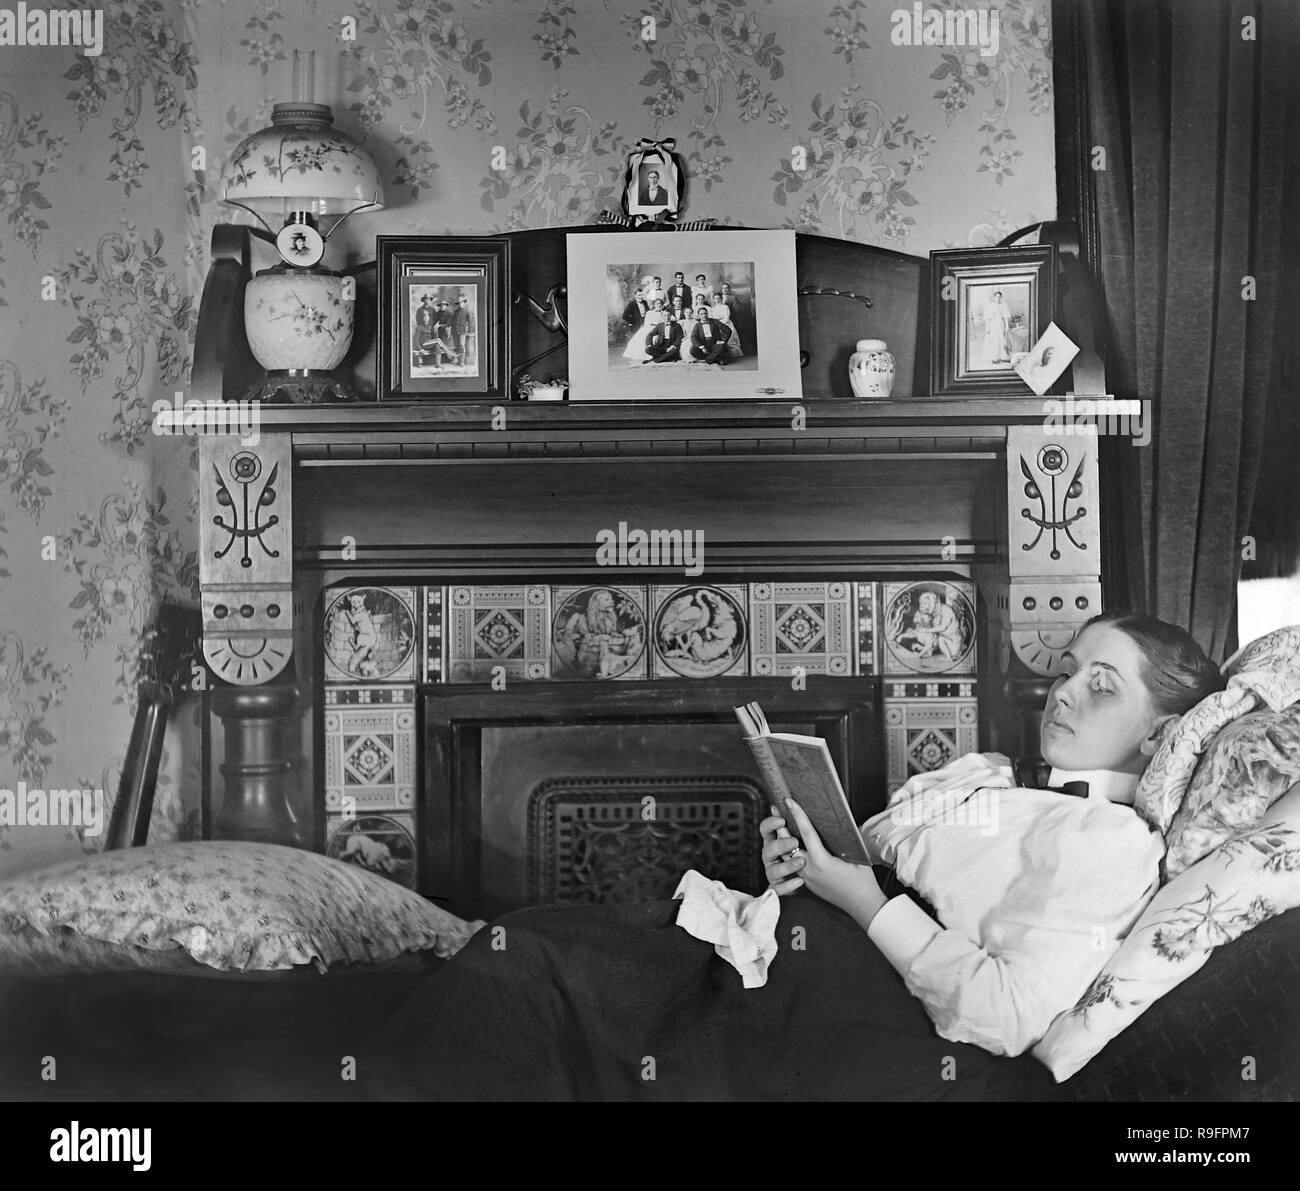 A young woman reads on a fainting couch before an ornately decorated hearth and mantle in an early 20th century parlor, ca. 1905. Stock Photo